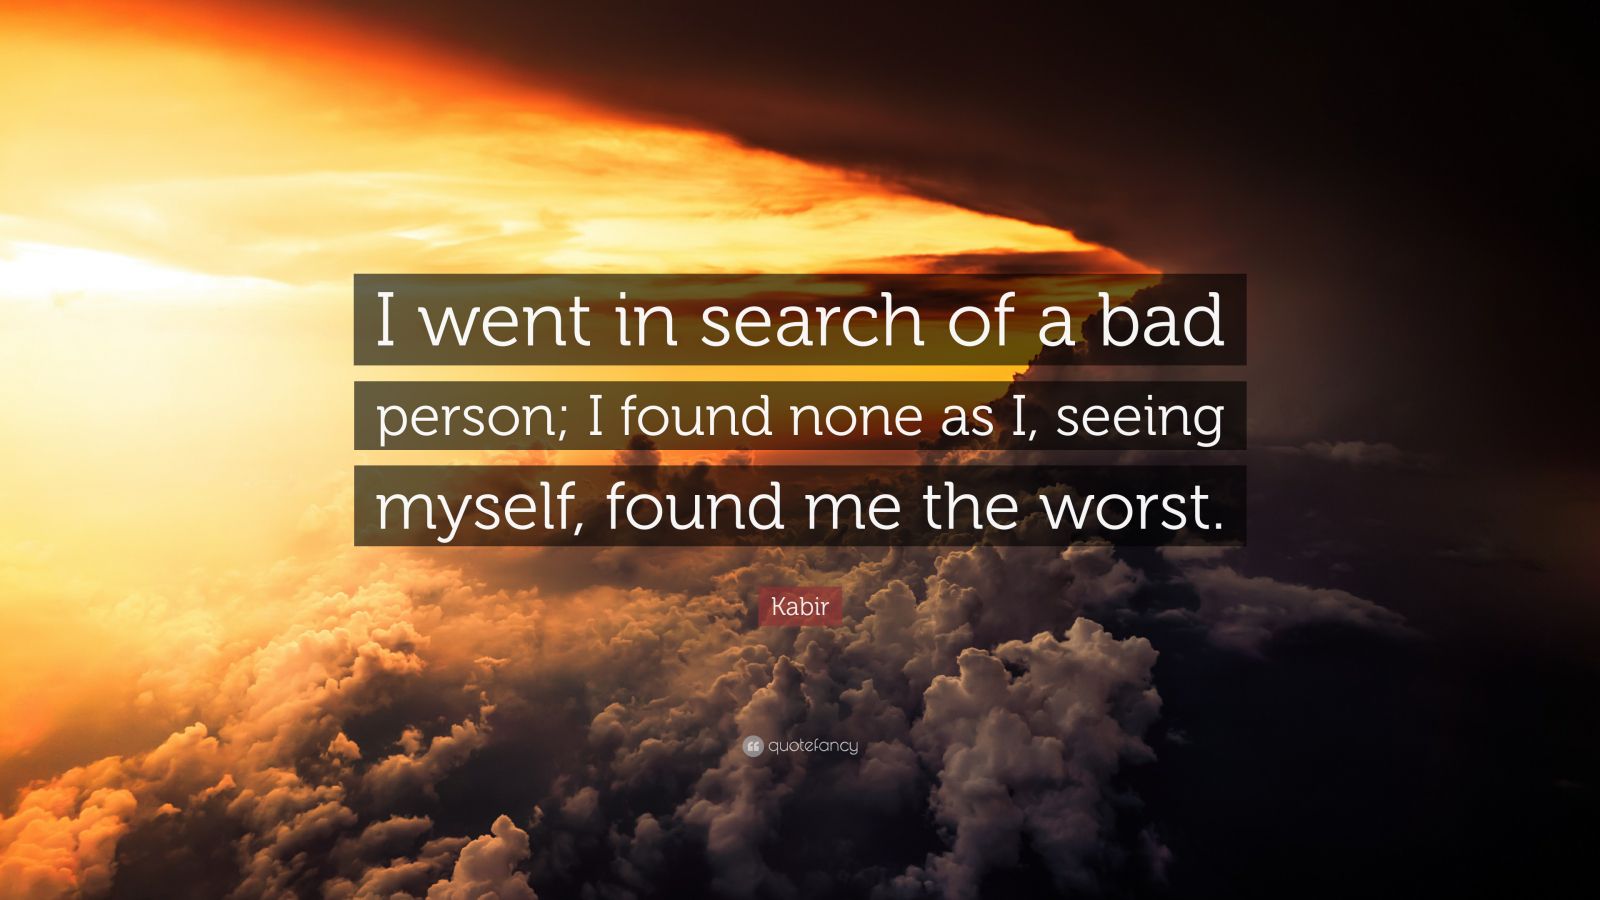 Kabir Quote: “I went in search of a bad person; I found none as I